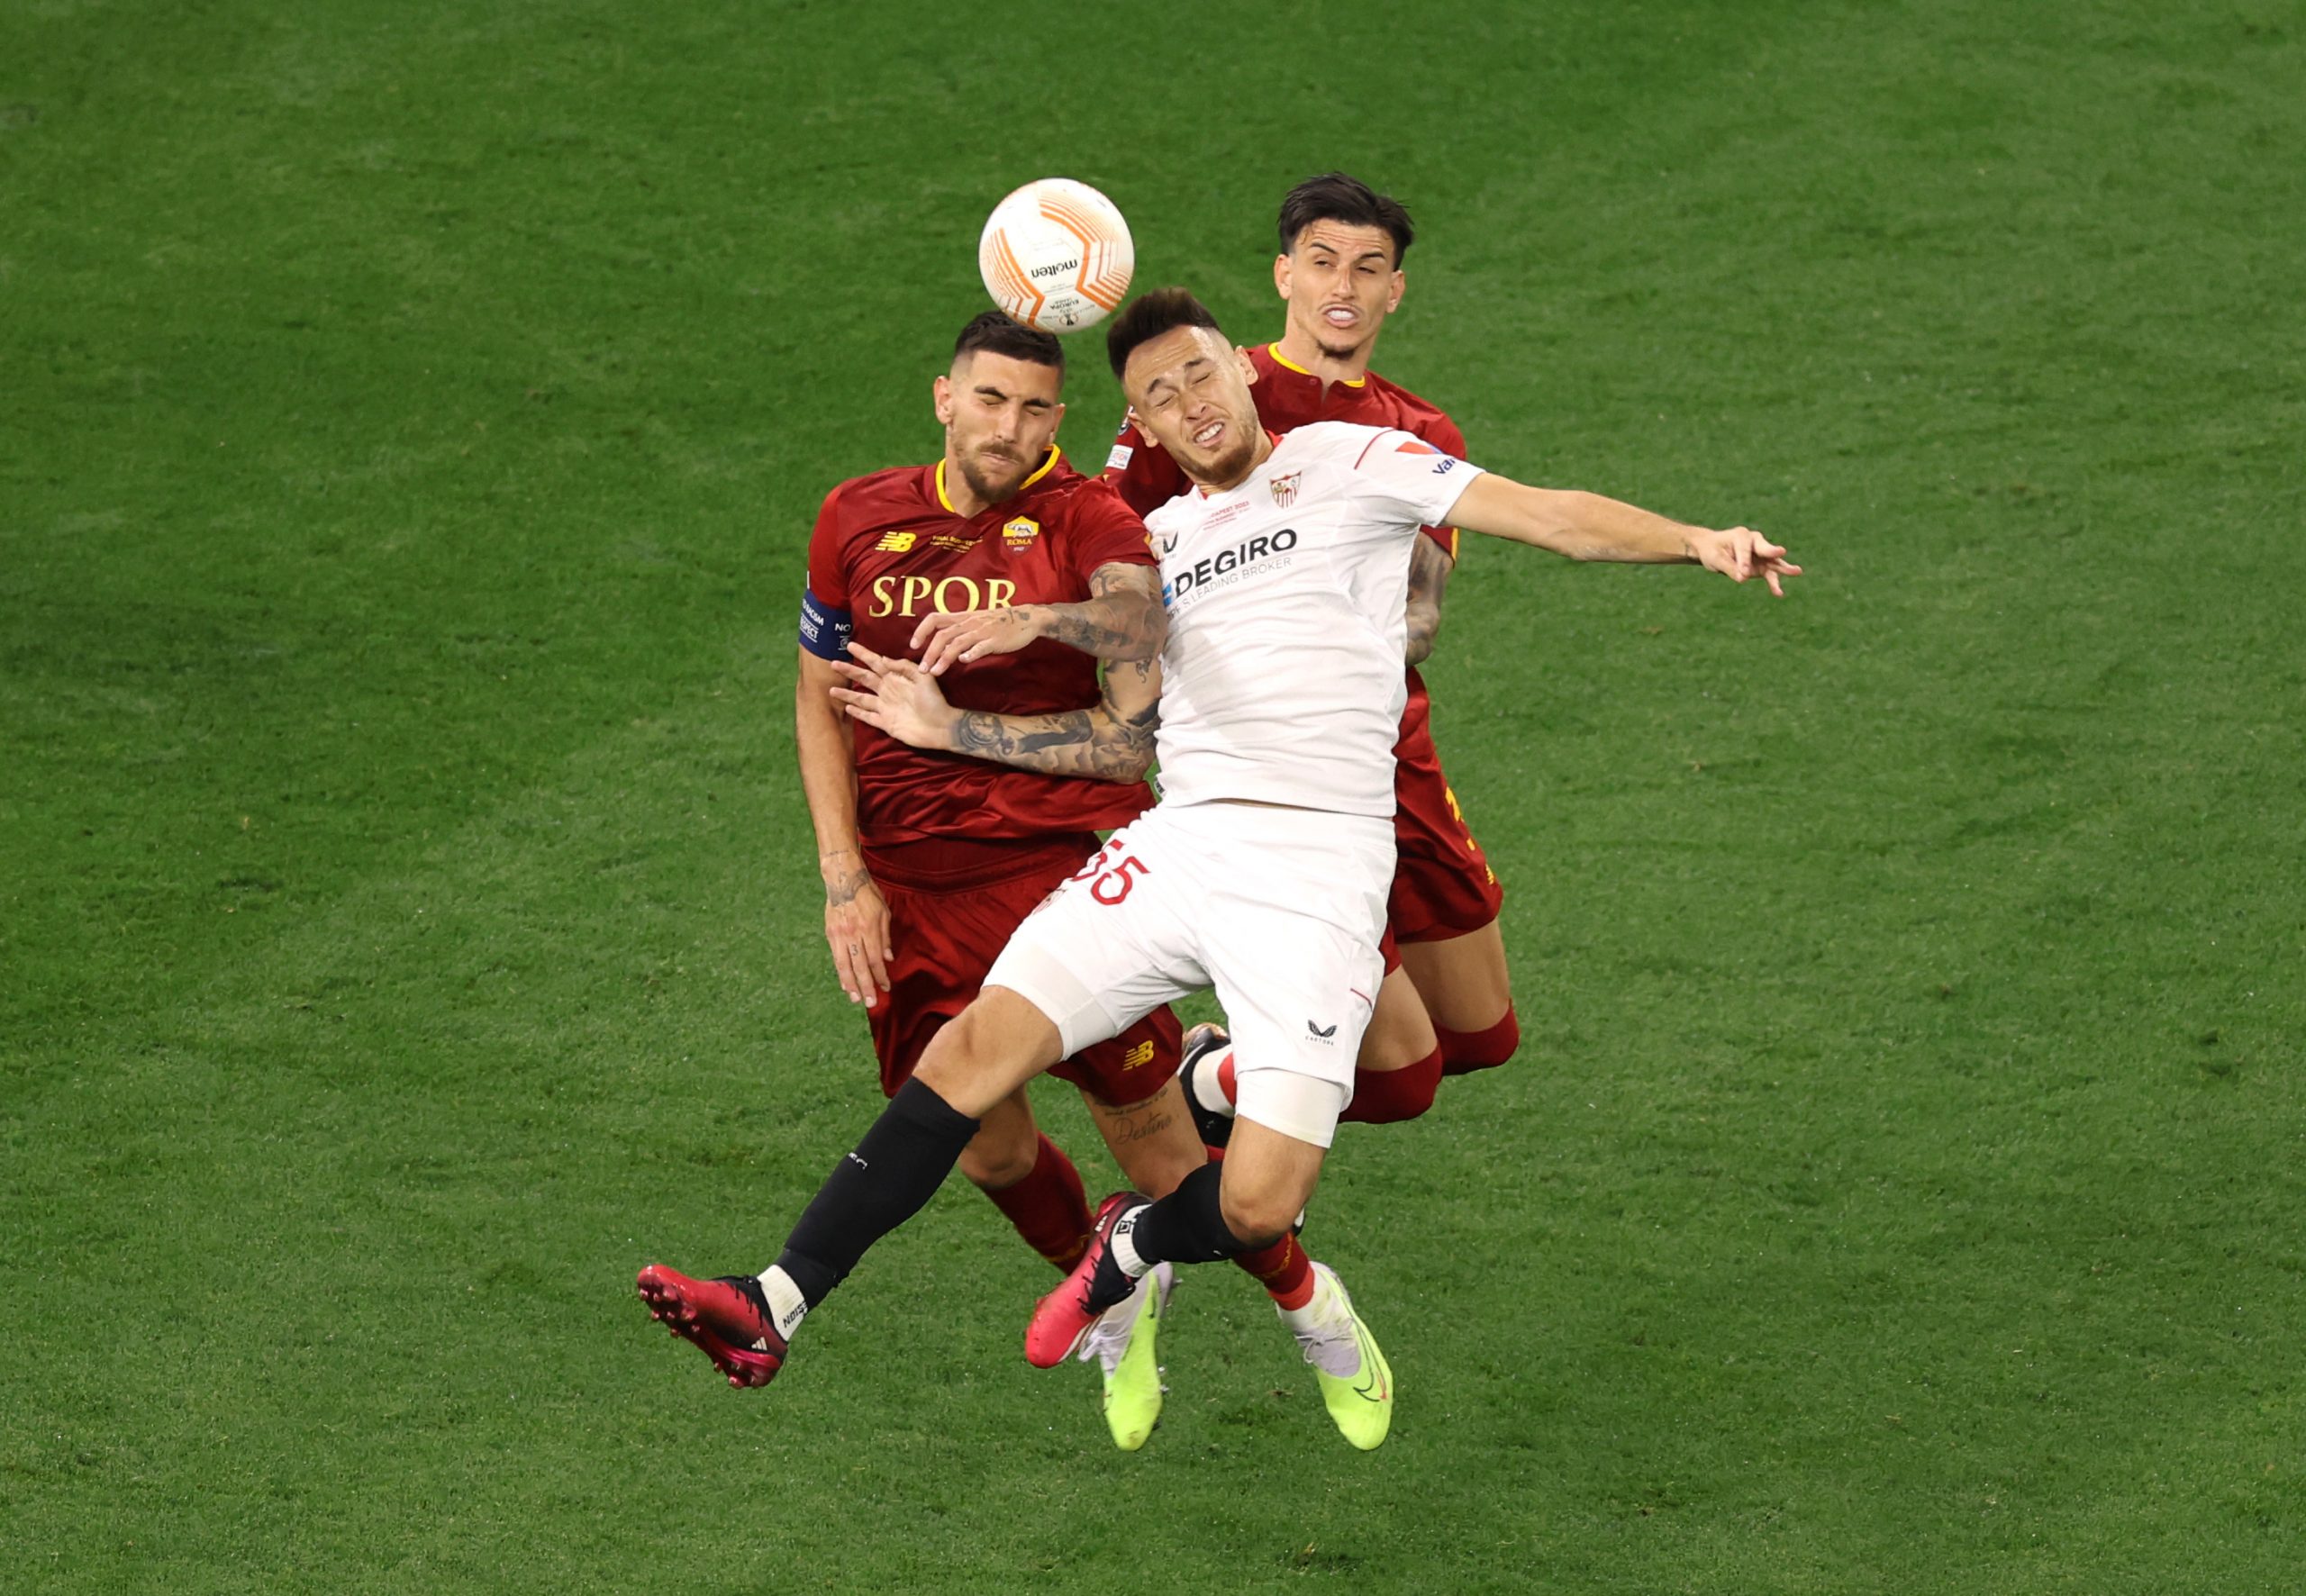 Lucas Ocampos of Sevilla FC battles for a header with Lorenzo Pellegrini and Roger Ibanez of AS Roma.